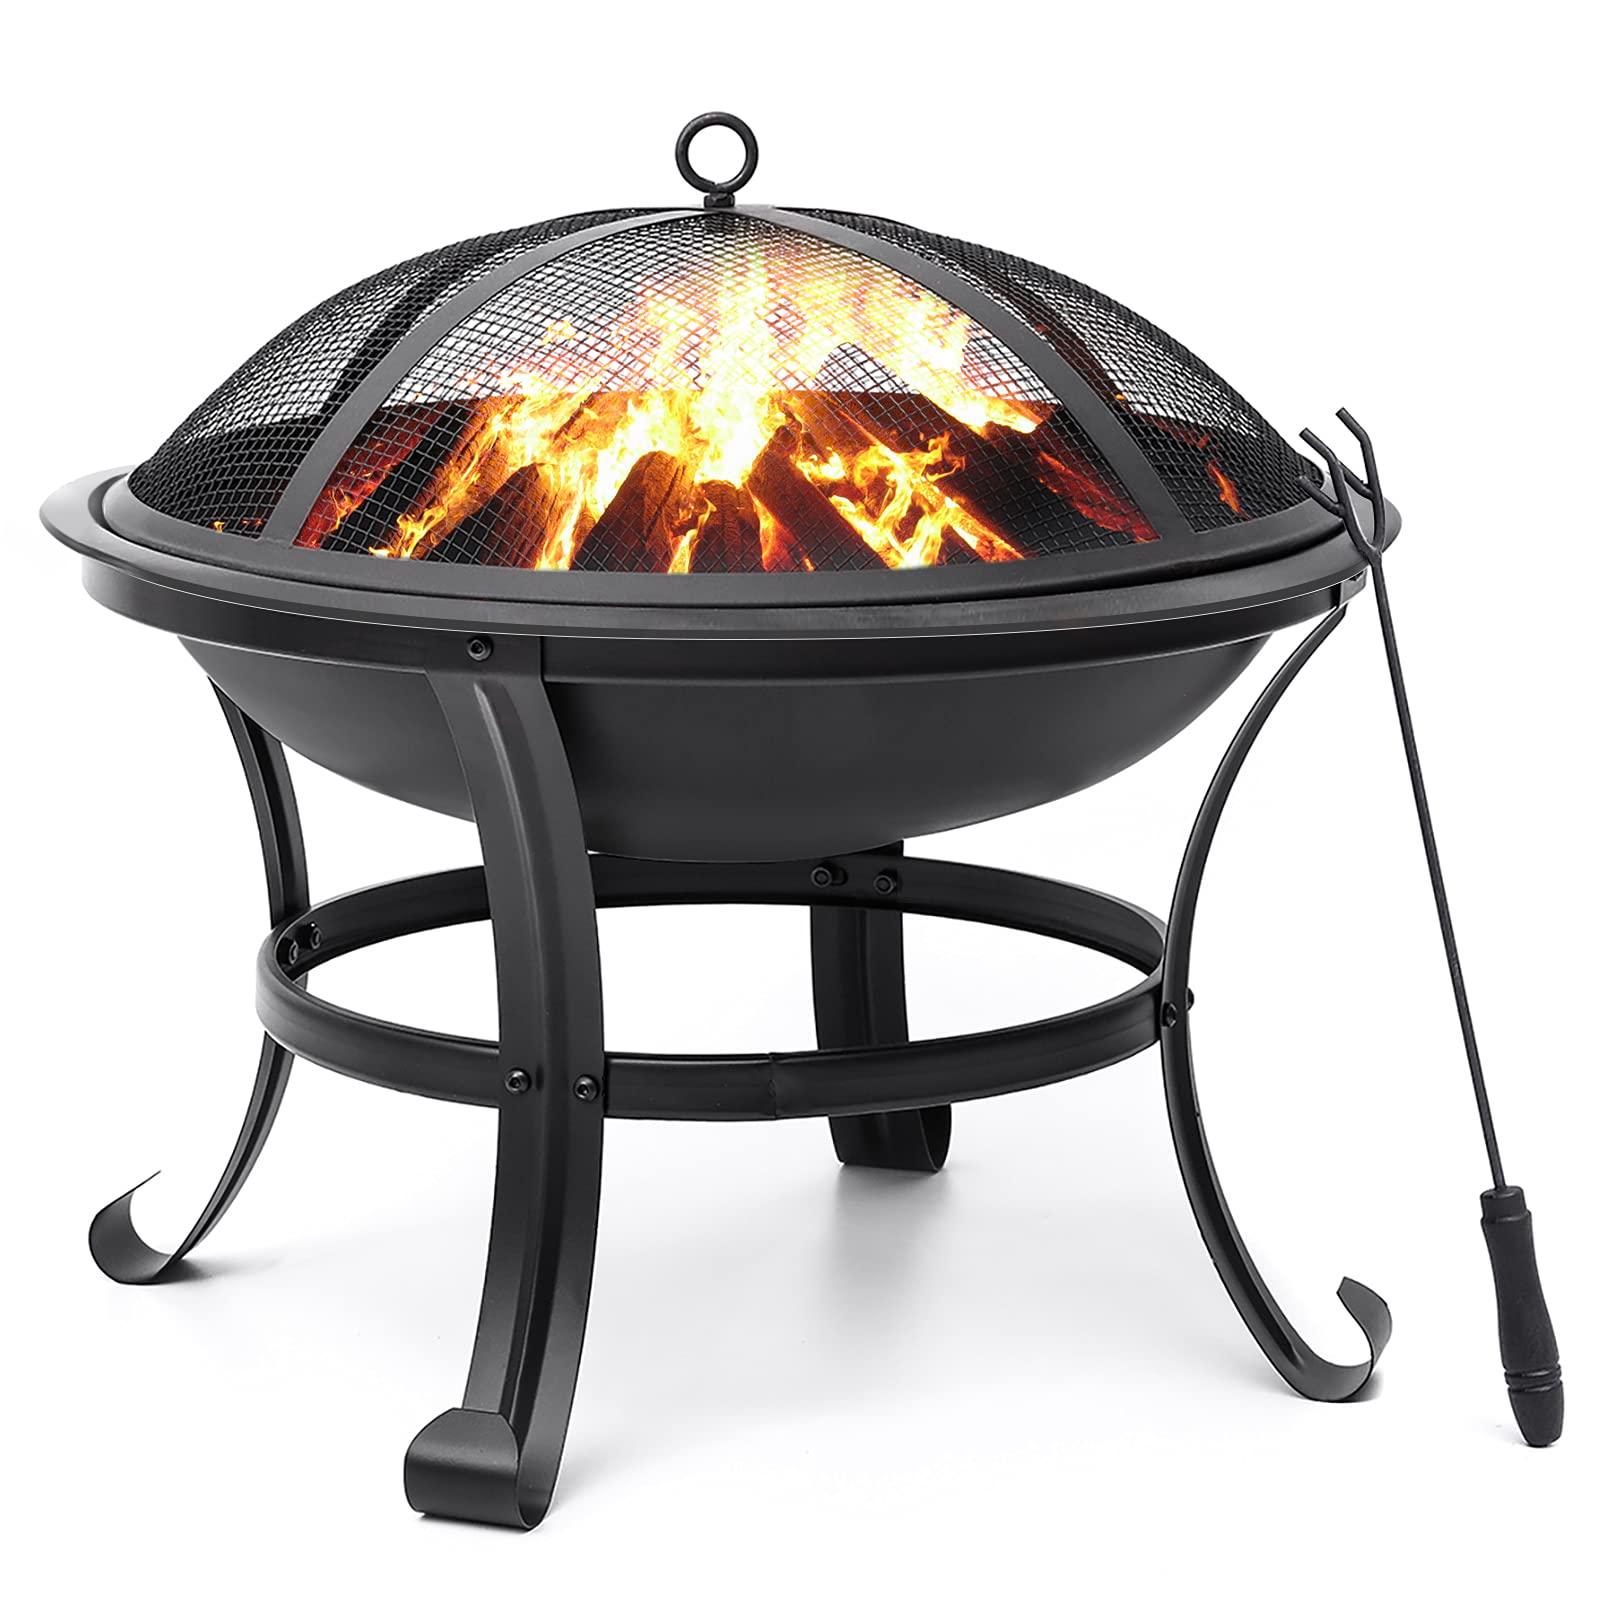 SINGLYFIRE 22 inch Fire Pit for Outside Outdoor Wood Burning Small Bonfire Pit Steel Firepit Bowl for Patio Camping Backyard Deck Picnic Porch,with Spark Screen,Log Grate,Poker - CookCave